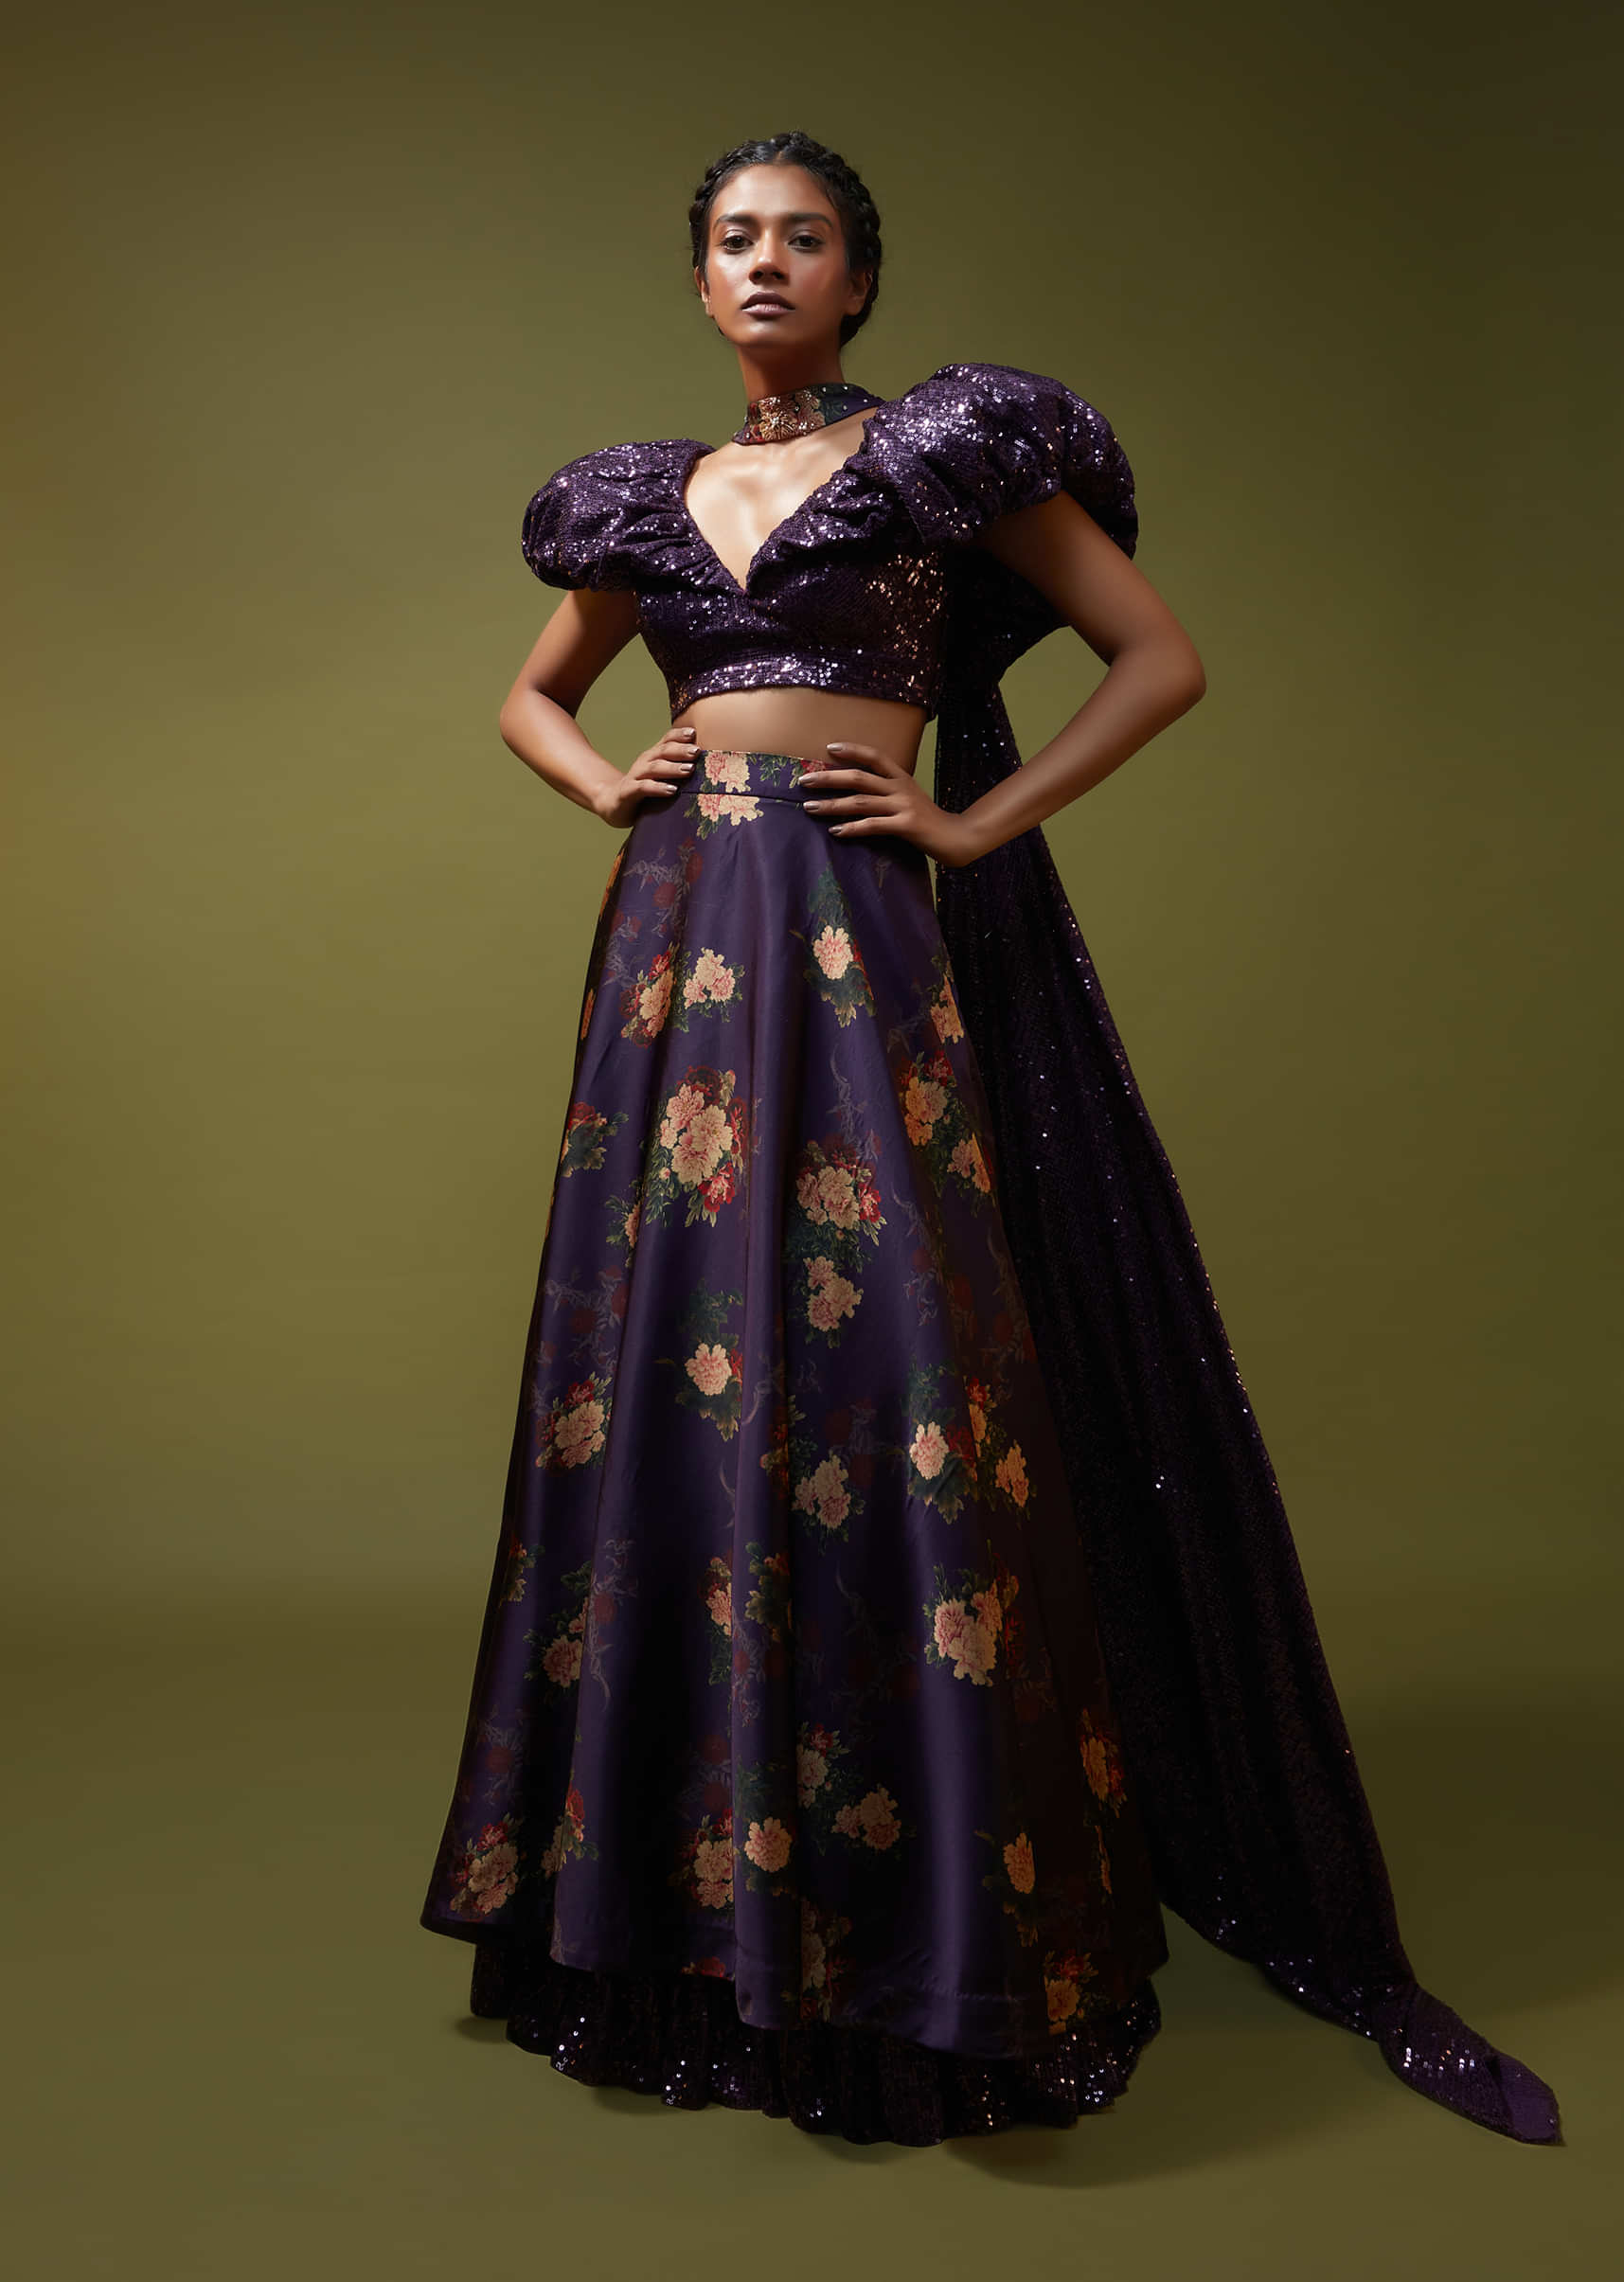 Jewel Purple Lehenga In Floral Printed Satin With A Sequins Crop Top Designed With An Elaborate Puff On The Shoulder And Neckline 